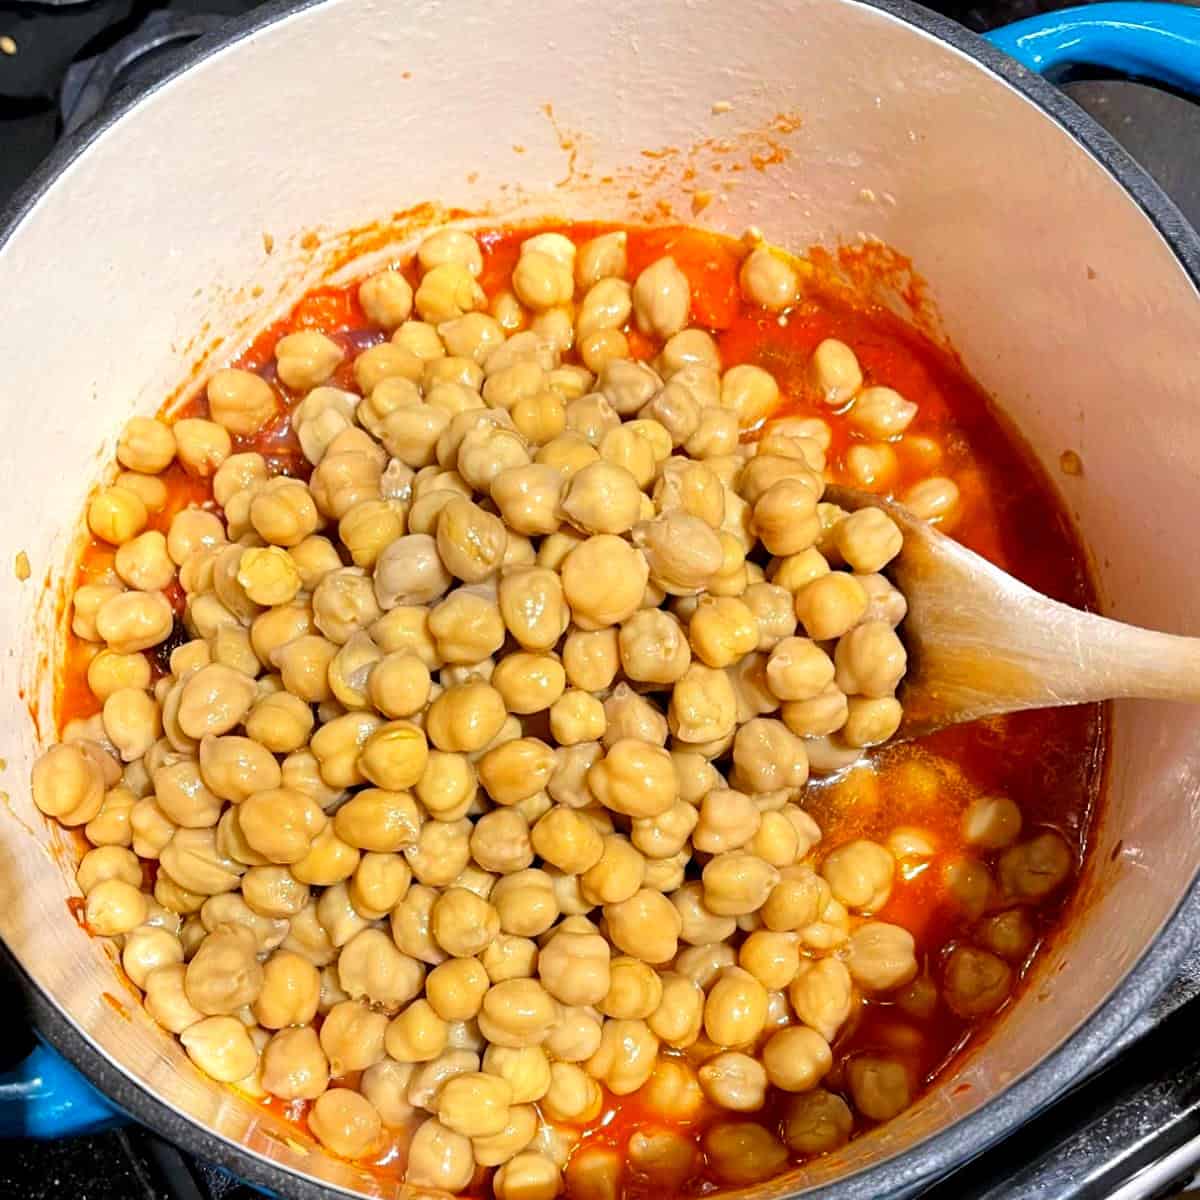 Chickpeas added to tomatoes in Dutch oven.